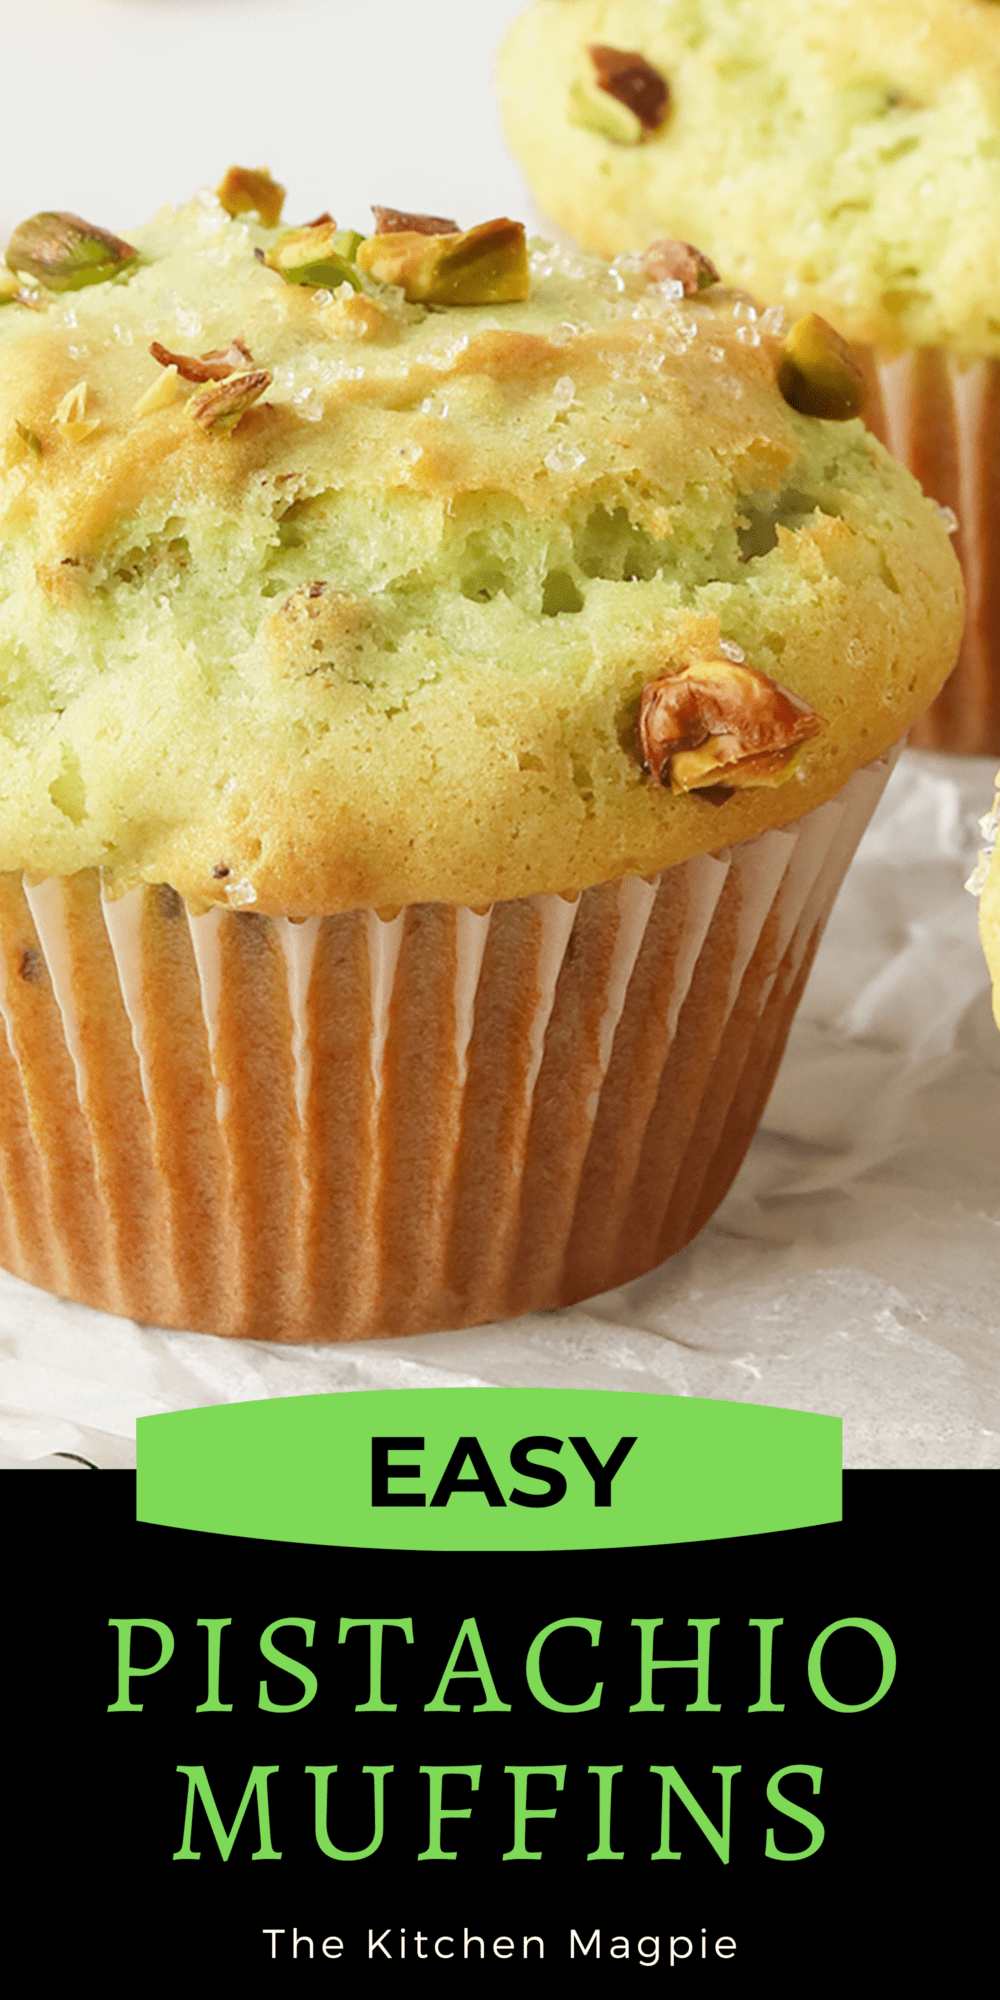 These Pistachio Muffins have a really pronounced pistachio flavor, they should be light, airy, and super professional, not to mention tasty.